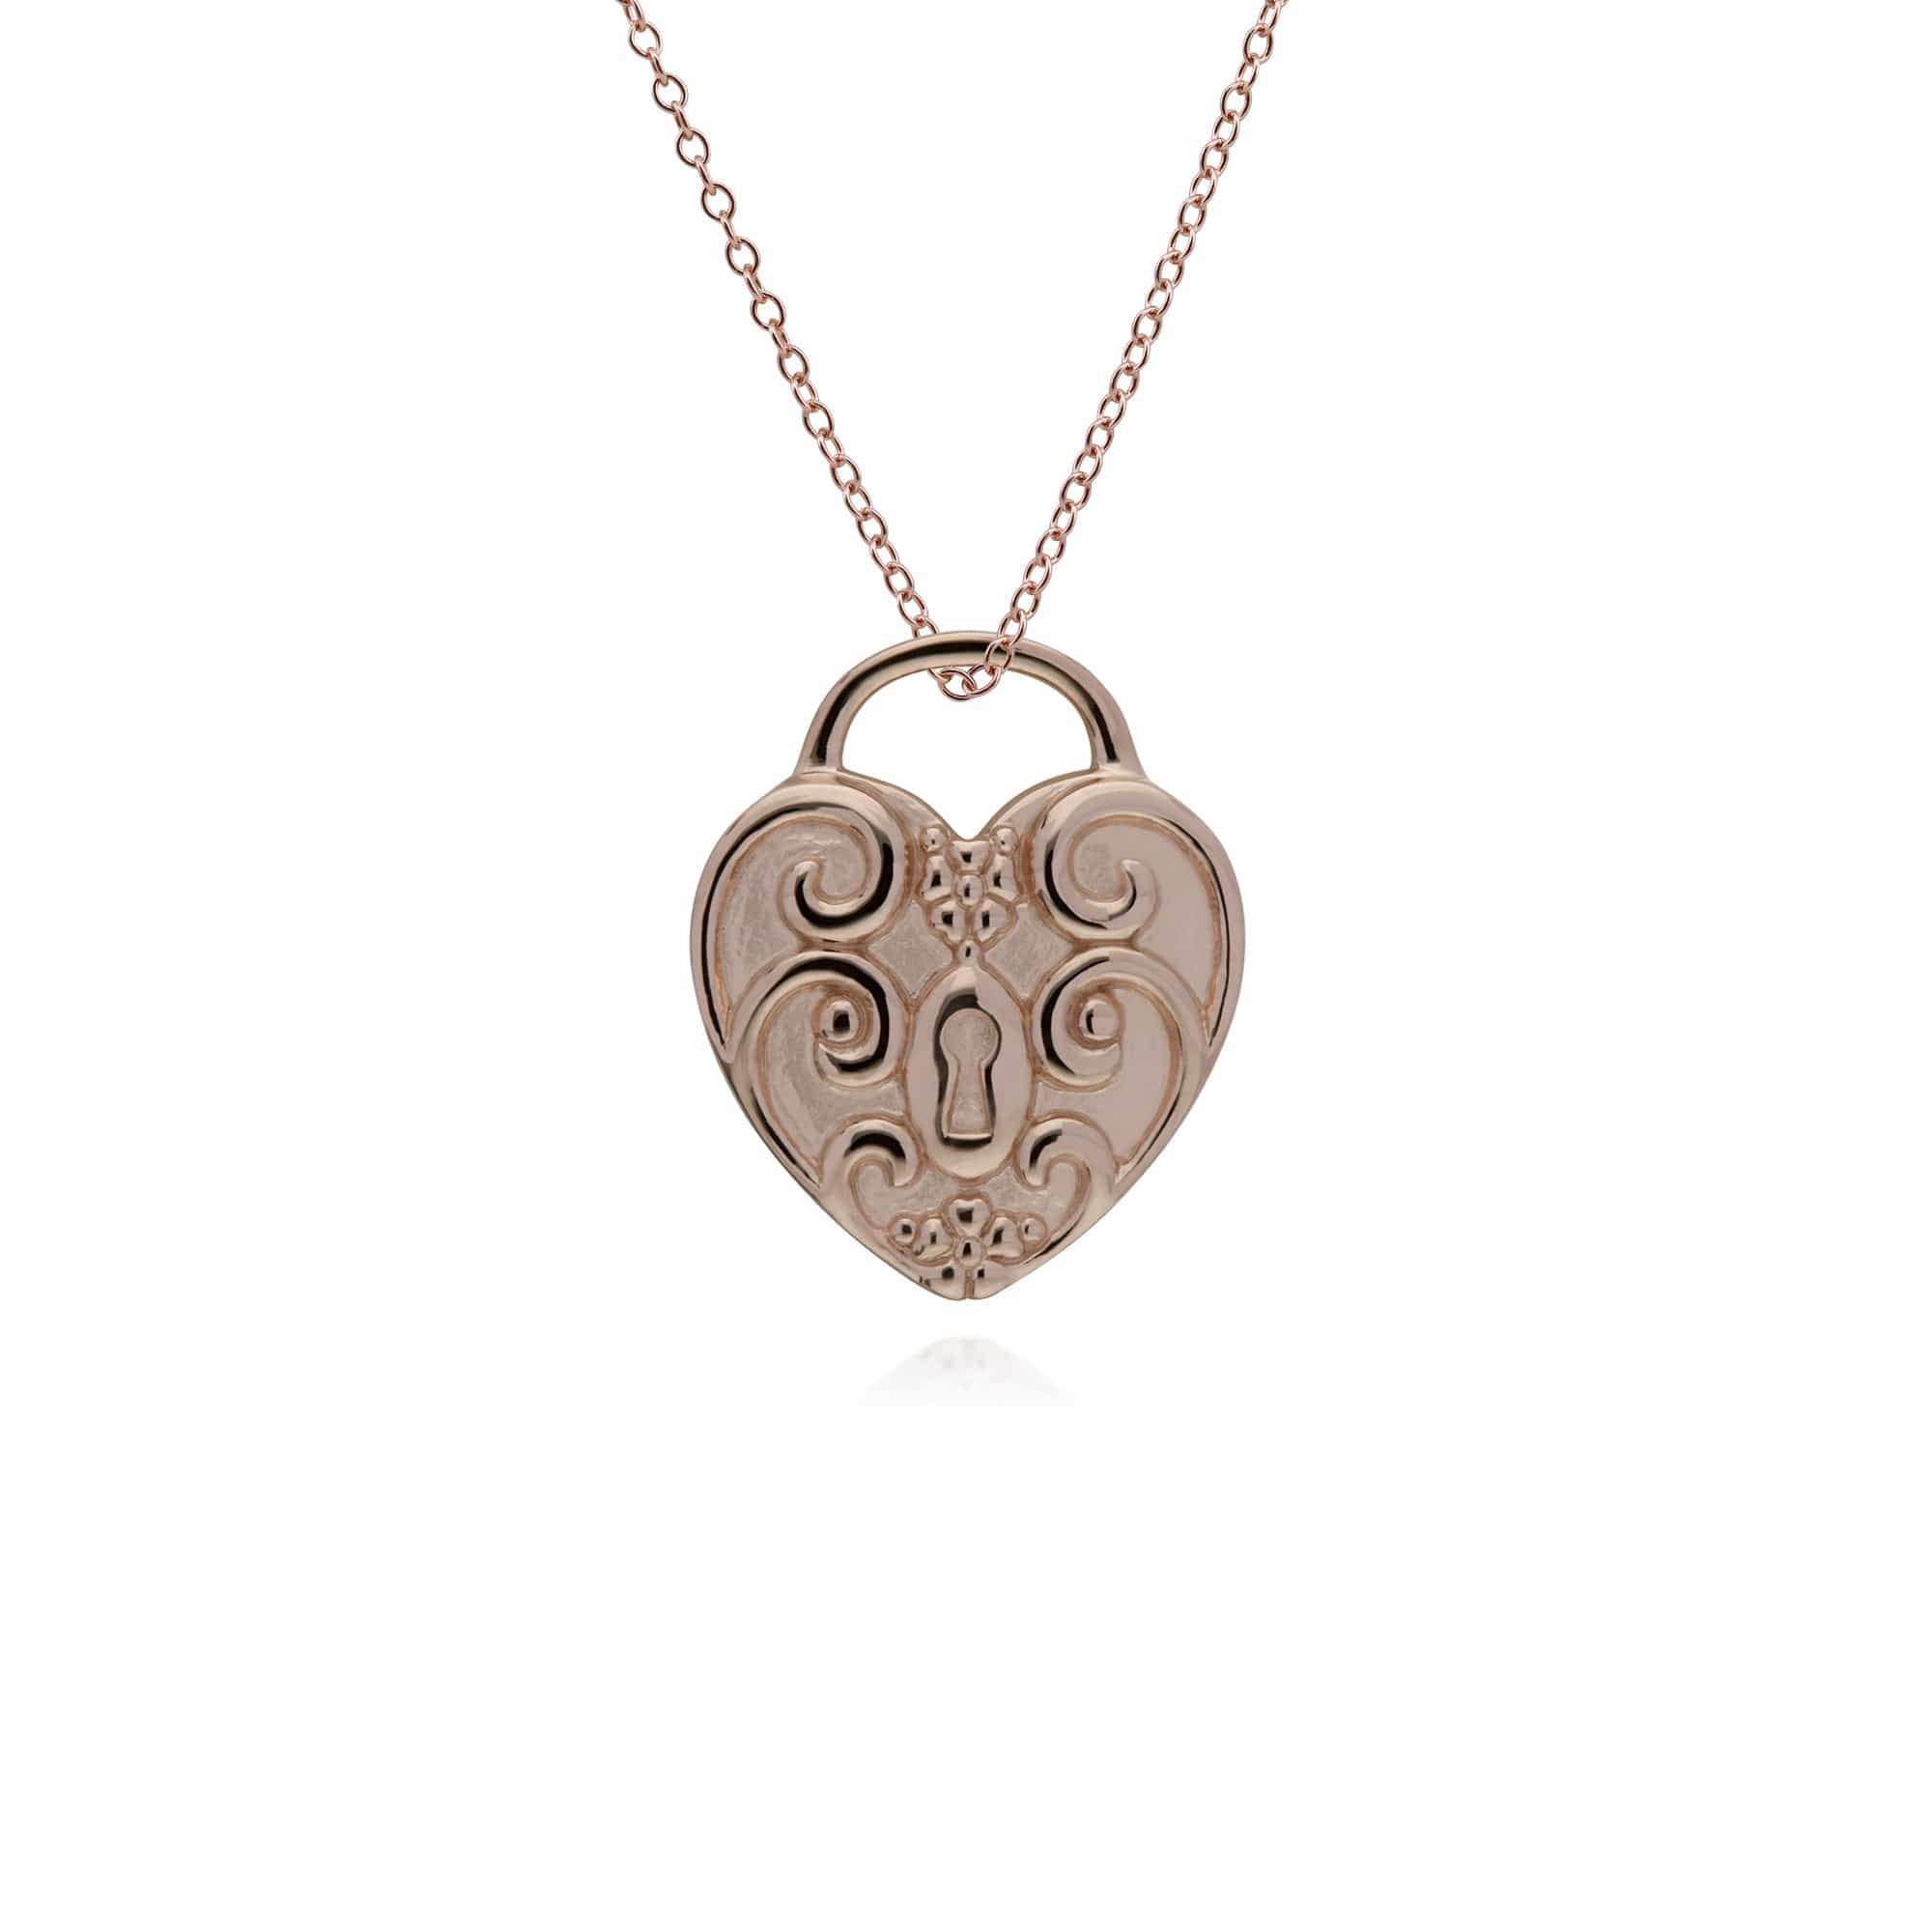 270P025701925-270P026501925 Classic Swirl Heart Lock Pendant & Pearl Charm in Rose Gold Plated 925 Sterling Silver 3